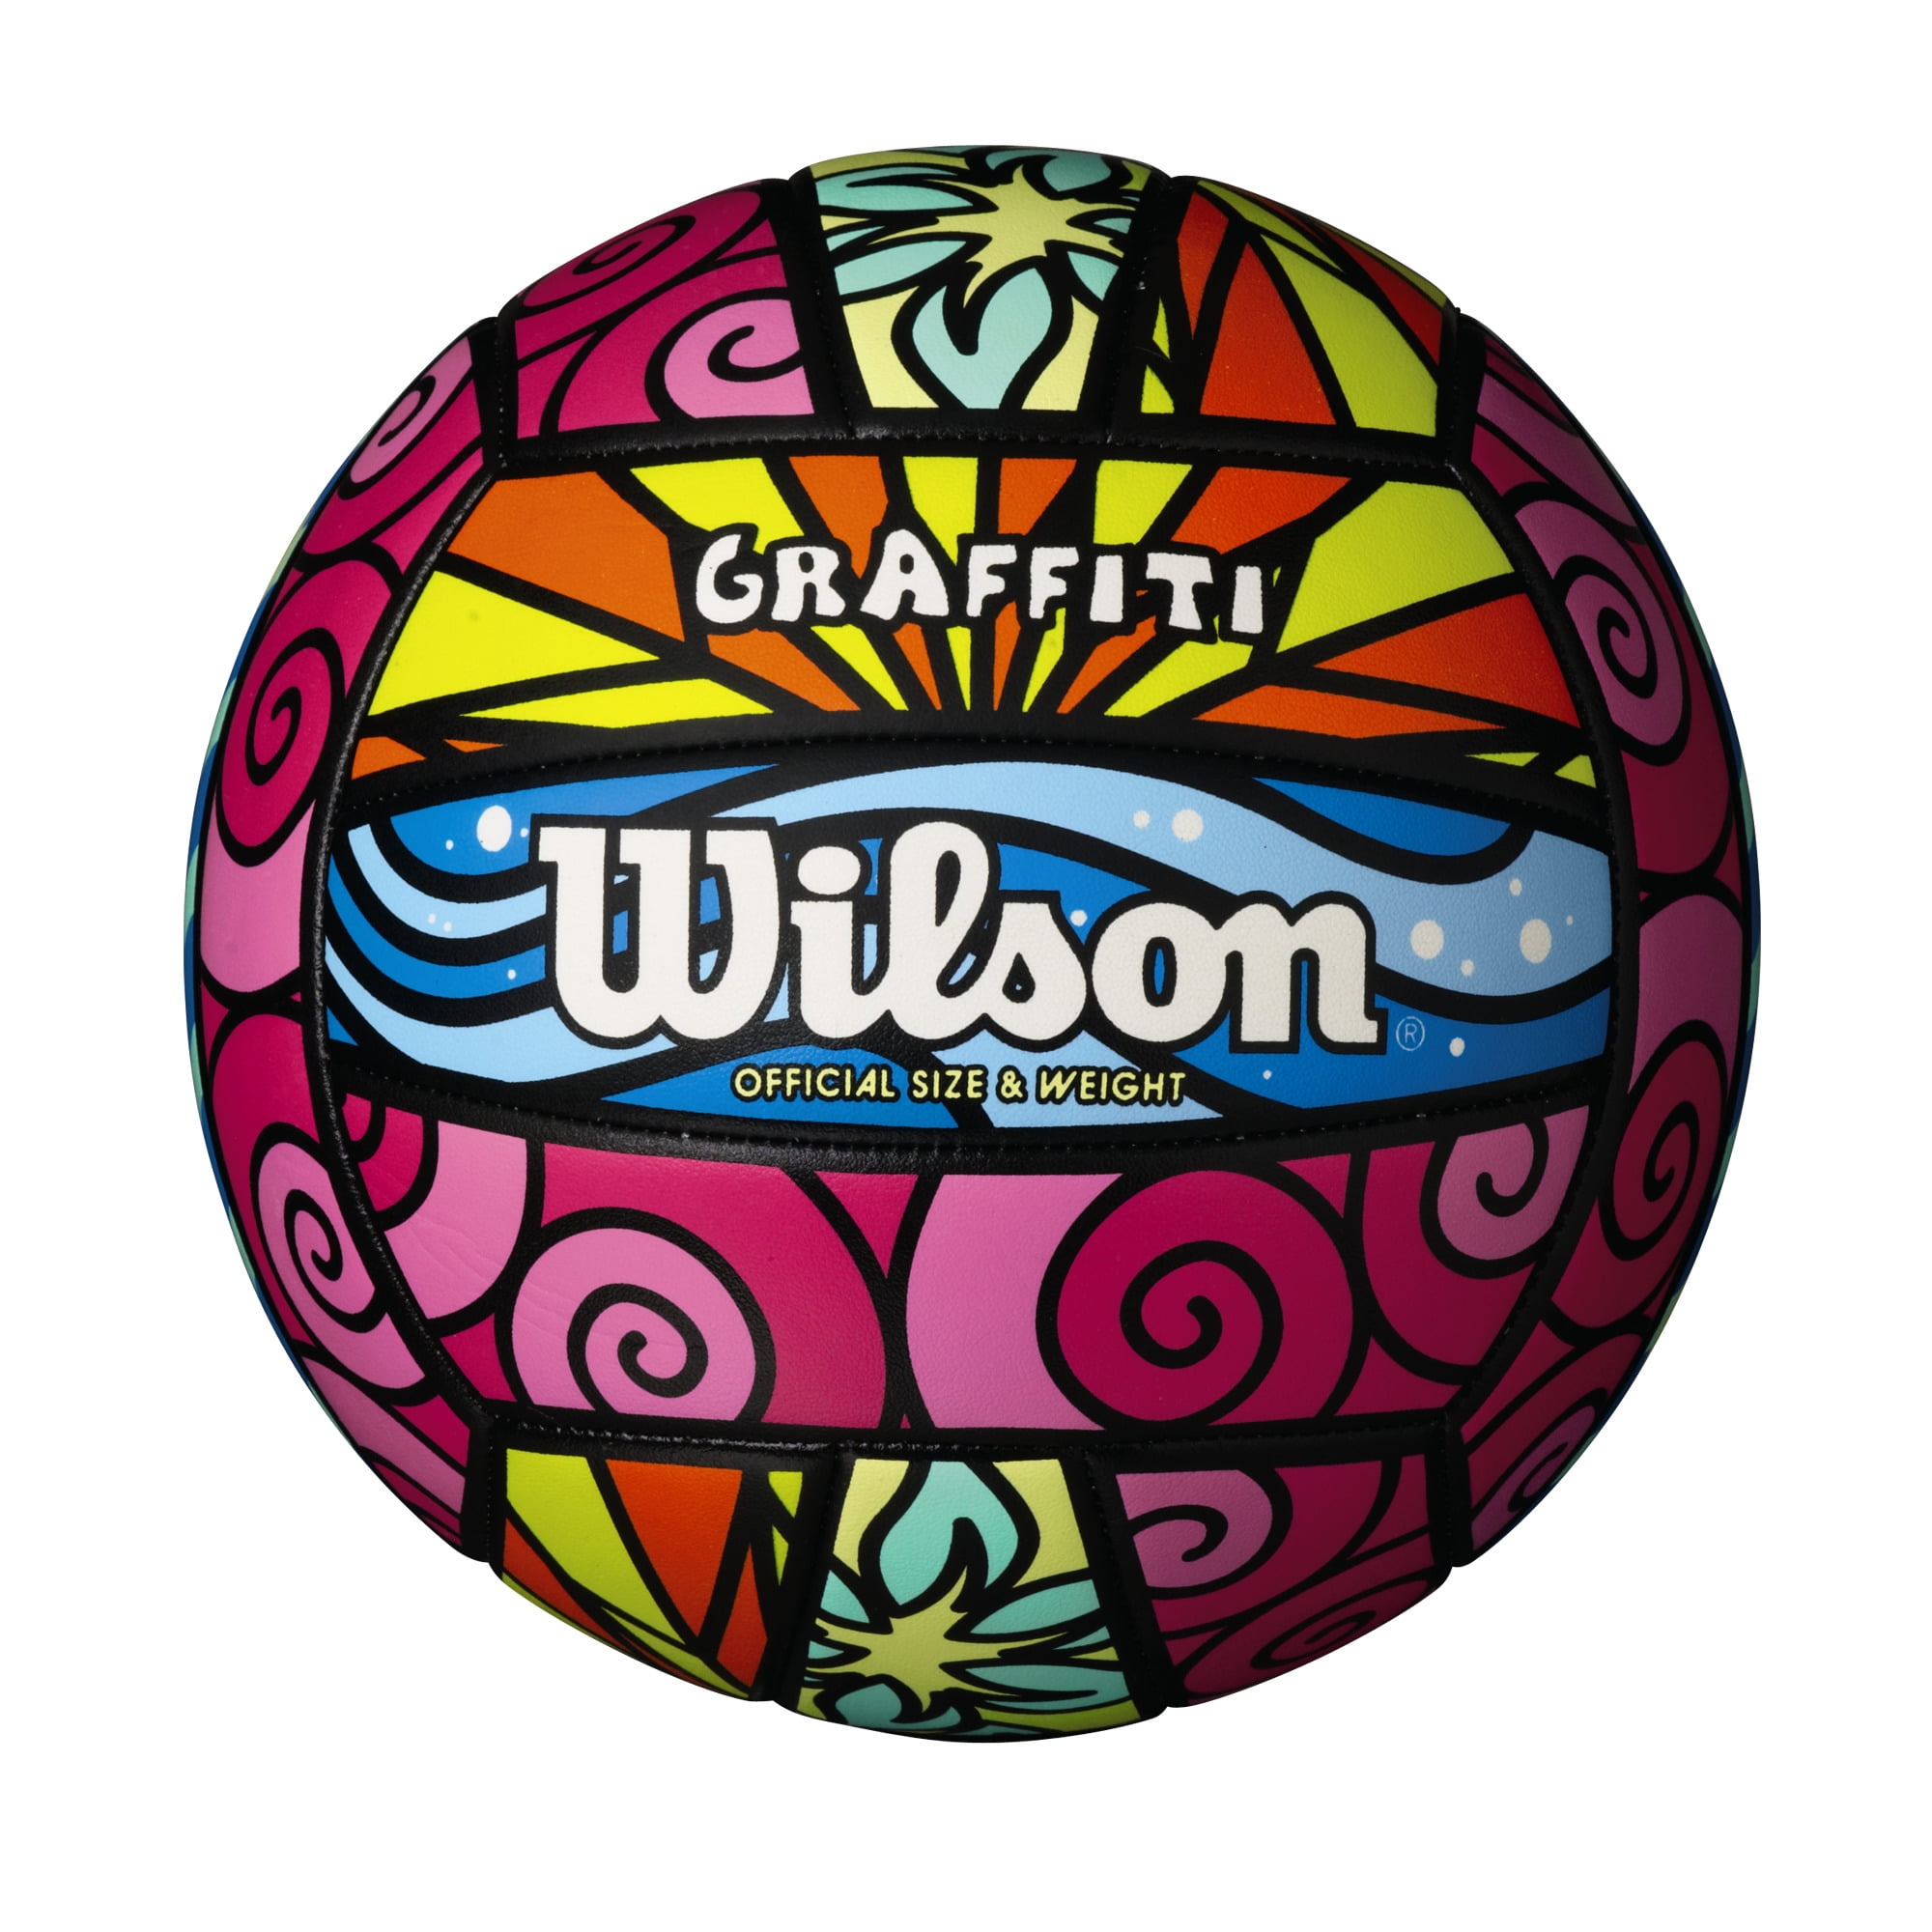 Wilson Cast Away Replica Outdoor Volleyball Official Size for sale online 